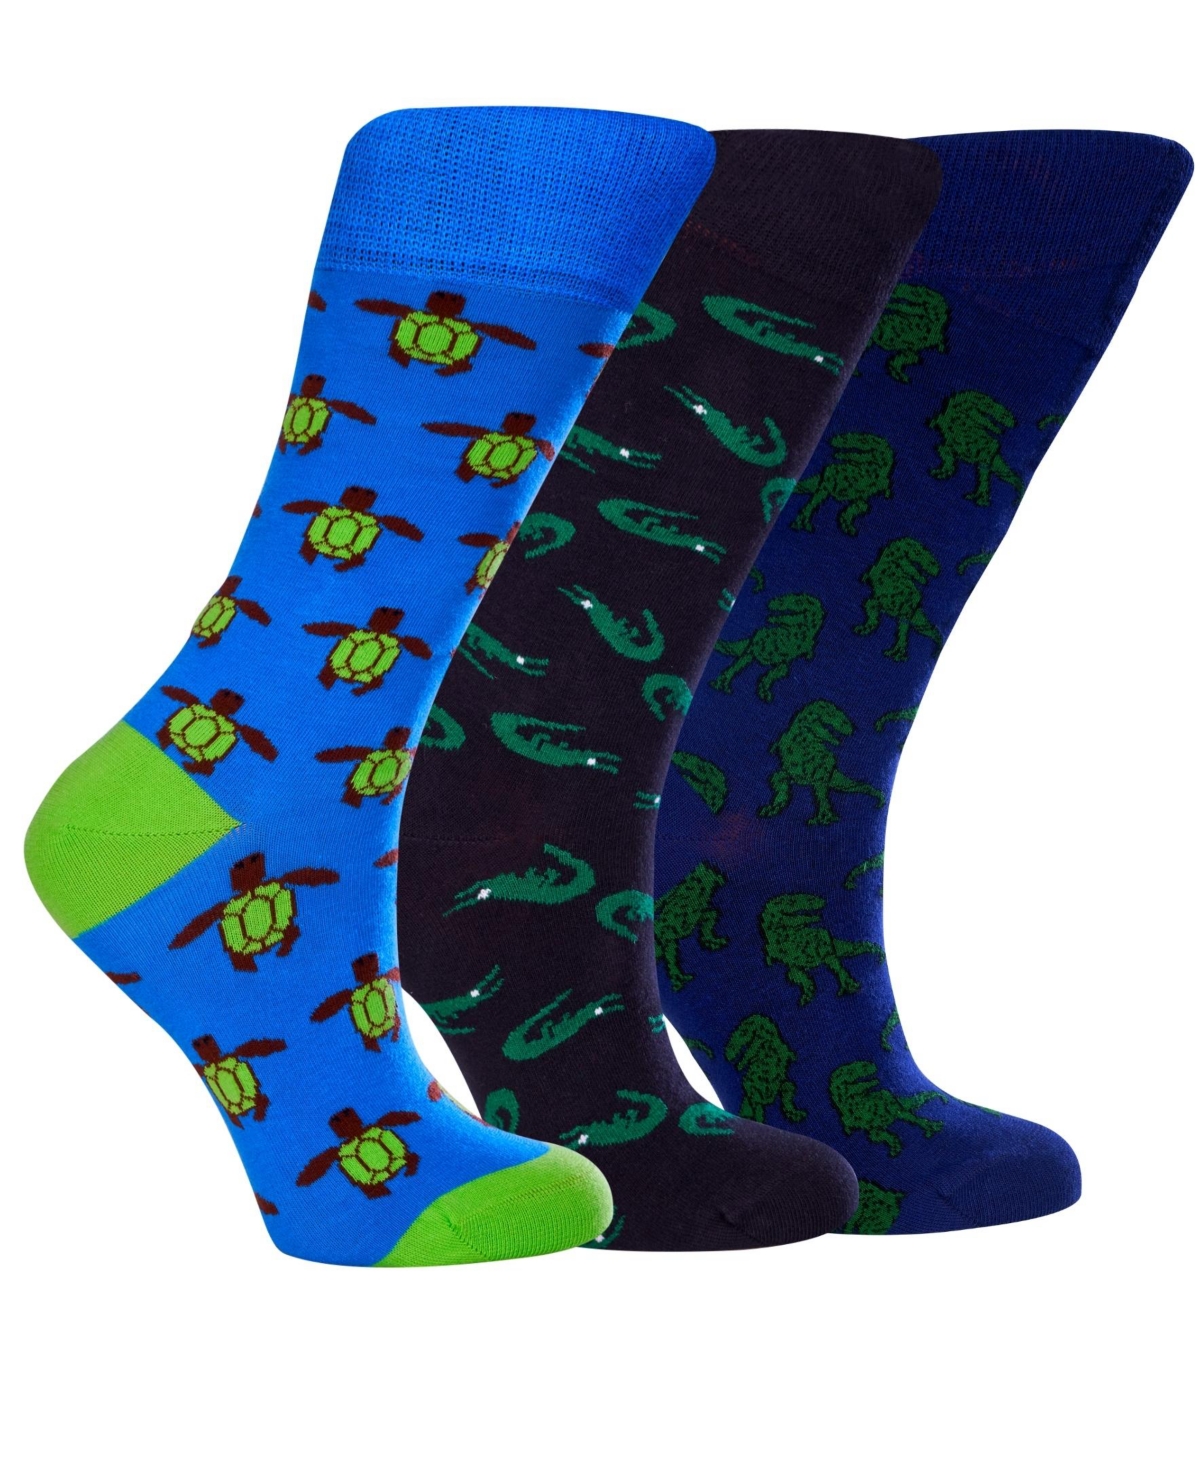 Love Sock Company Women's Ancient Bundle W-Cotton Novelty Crew Socks with Seamless Toe Design, Pack of 3